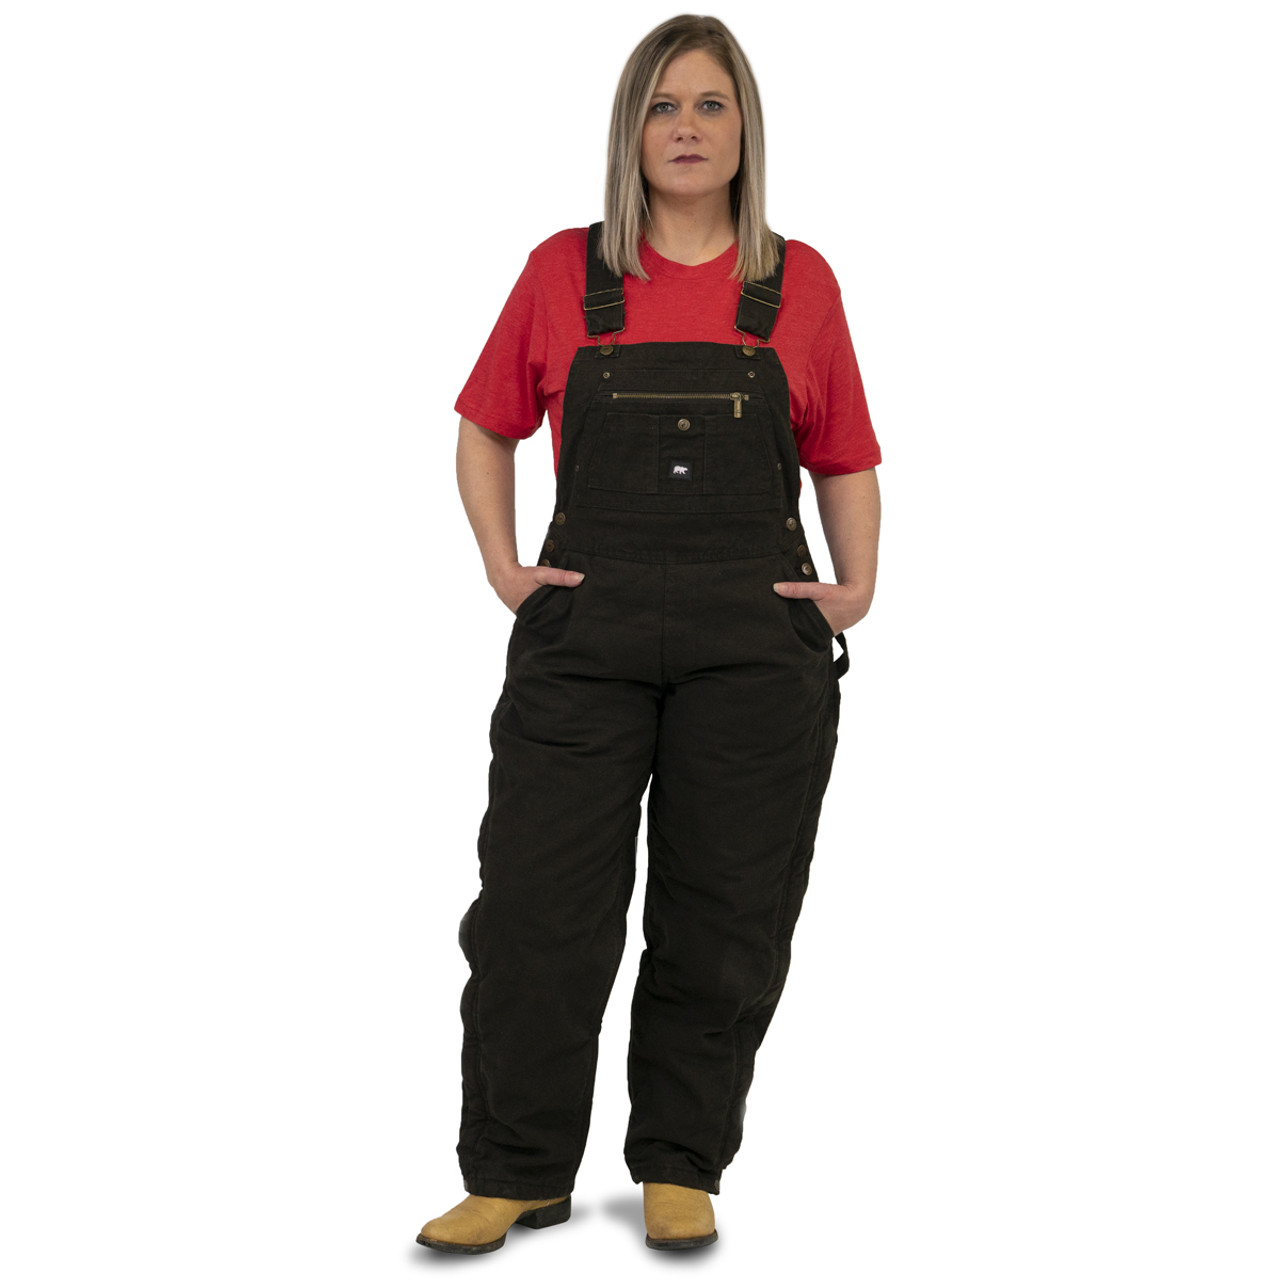 https://cdn11.bigcommerce.com/s-r4f6haoaux/images/stencil/1280x1280/products/172/2225/290-24-womens-insulated-bib-overall-chocolate-Polar-King-model-front__19138.1661197531.jpg?c=1